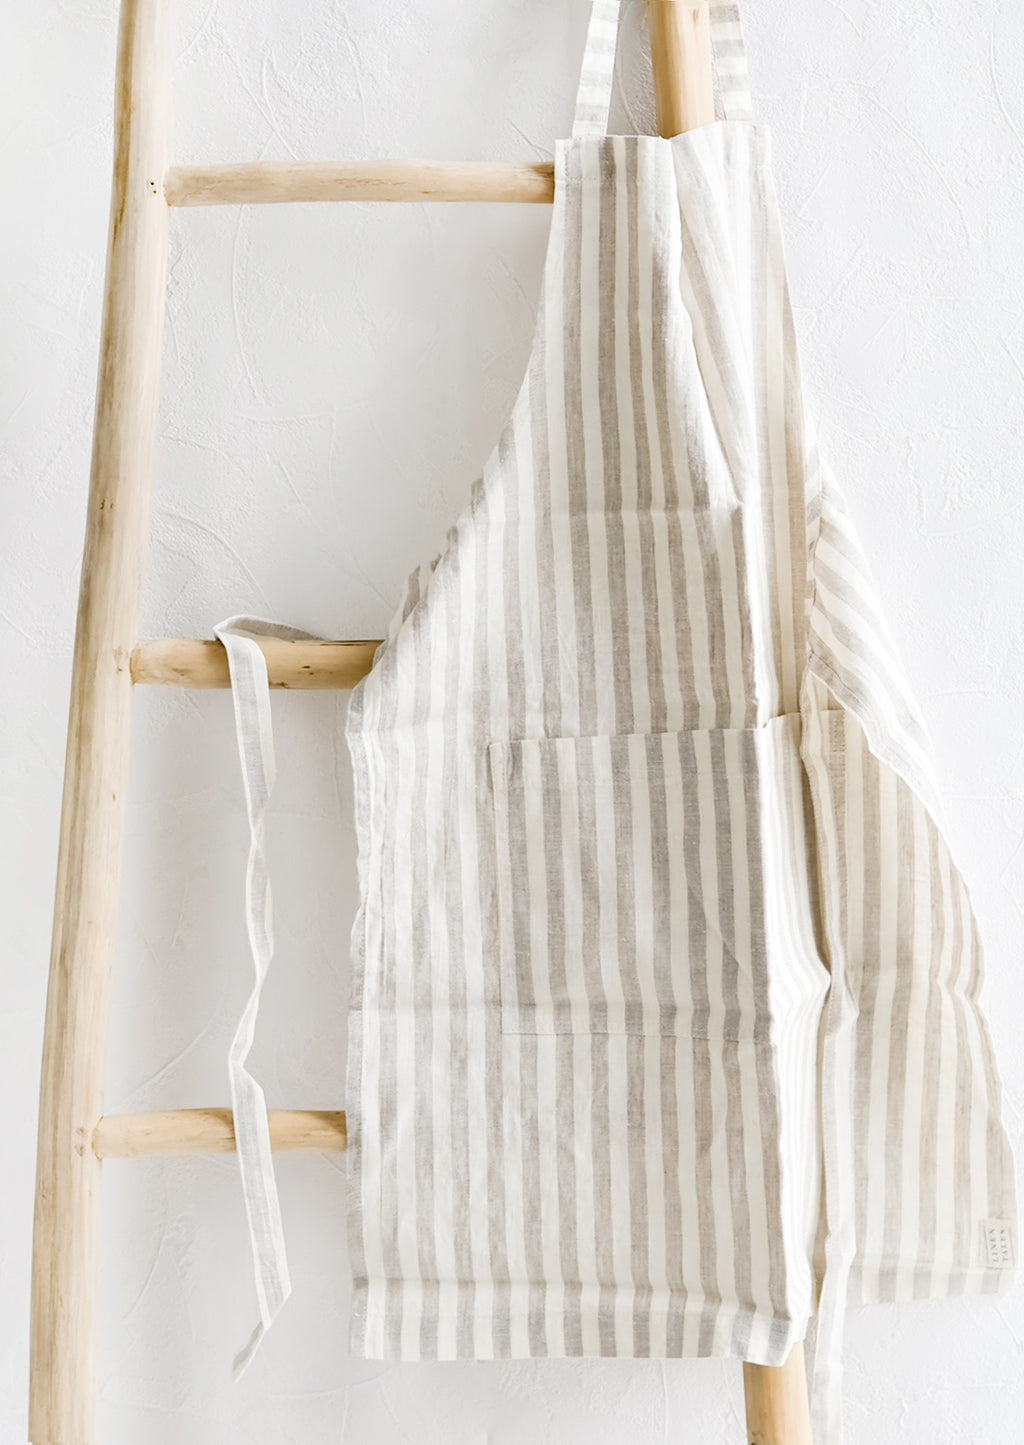 Natural Stripe: A tan and white striped linen apron hung on a wooden ladder.